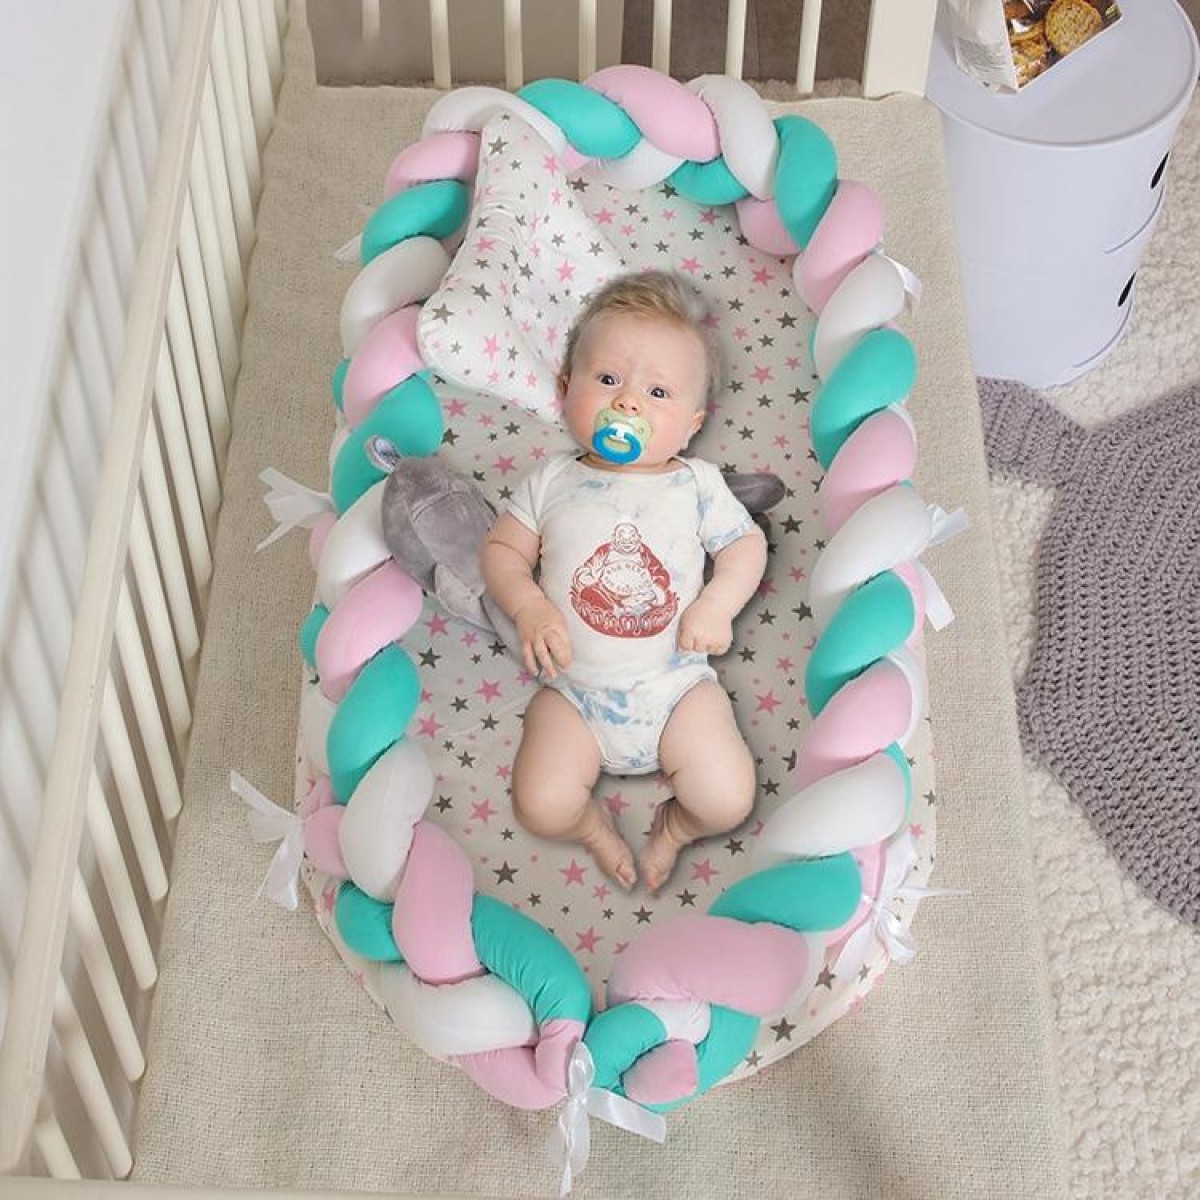 Cotton Woven Folding Portable Crib Bed Bionic Removable and Washable Manual Fence Three-dimensional Protective Crib(White blue pink)